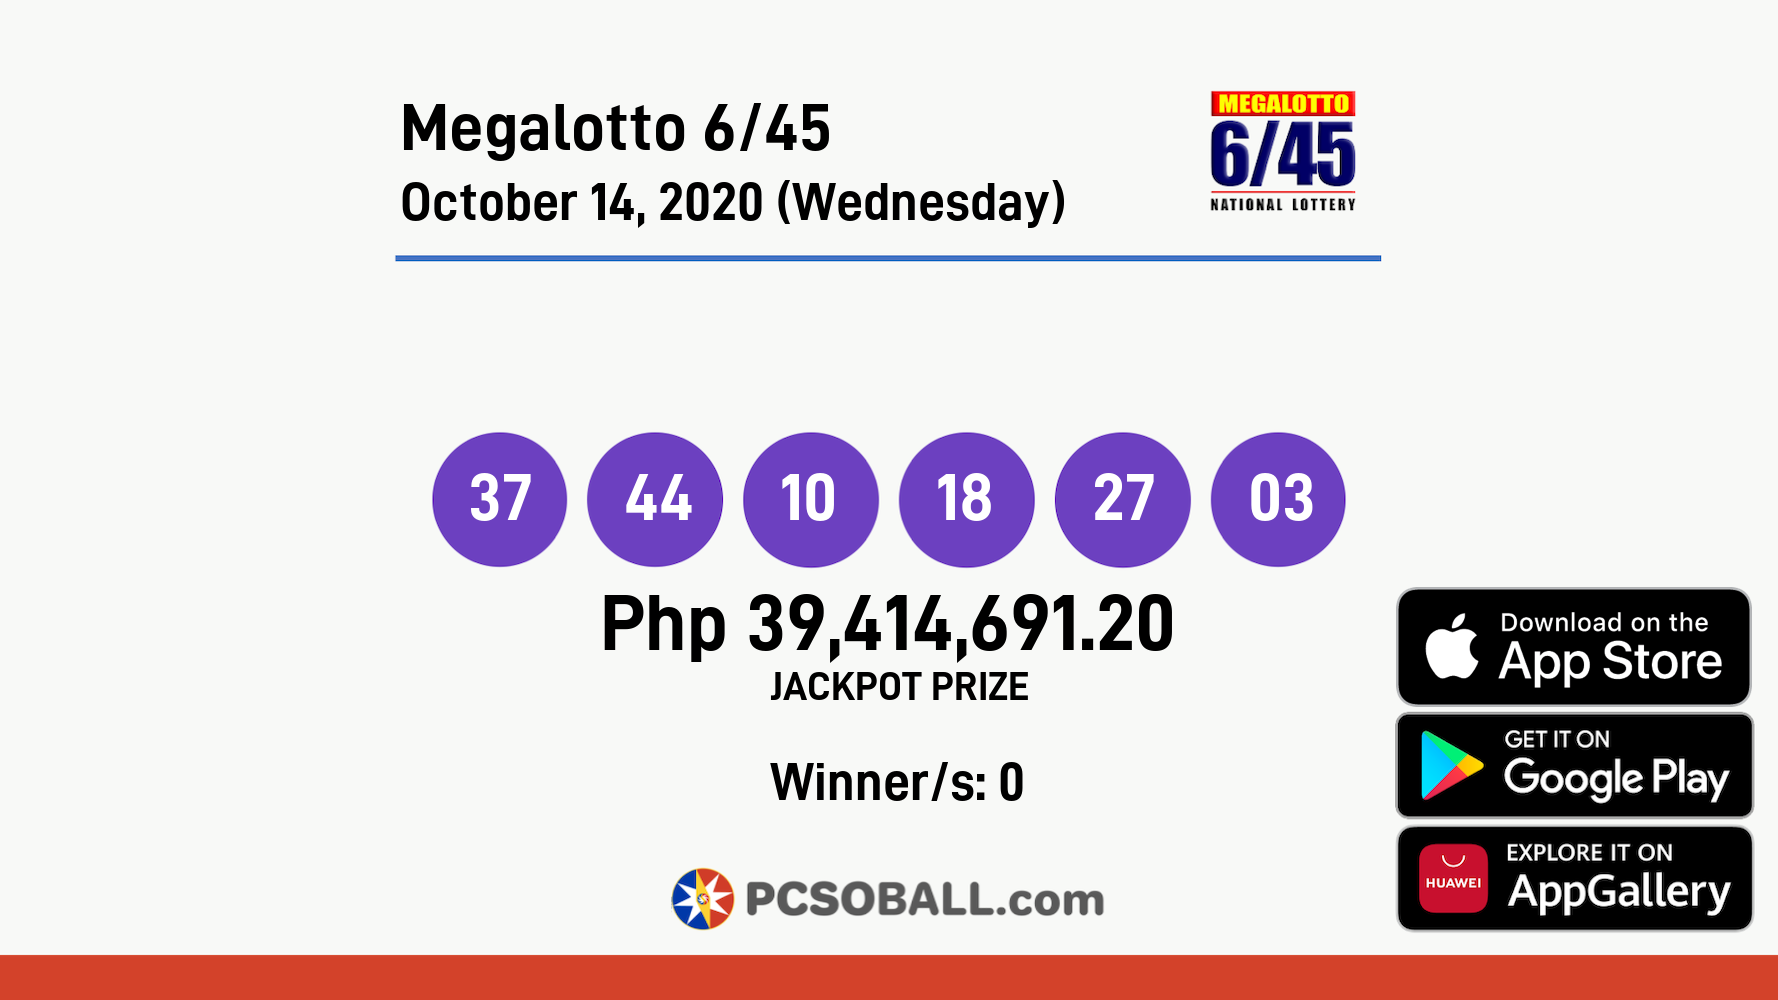 Megalotto 6/45 October 14, 2020 (Wednesday) Result